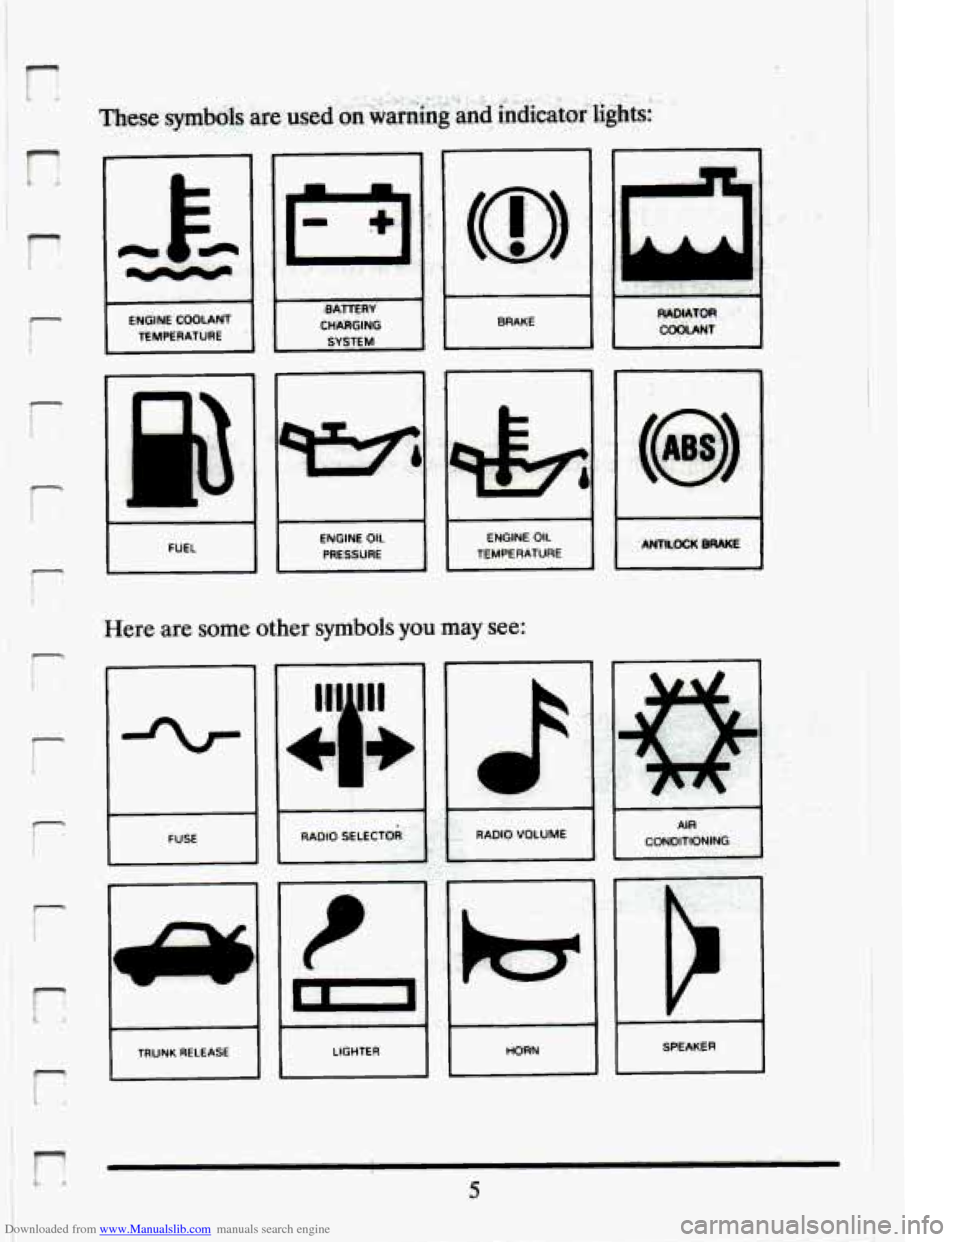 CADILLAC ELDORADO 1994 10.G Owners Manual Downloaded from www.Manualslib.com manuals search engine r 
t t. 
i 
i 
r 
r 
r 
r 
r 
r 
r 
I FUEL I 
ENGINE OIL TEMPERATURE 
Here  .are  some  other symbols you may see: 
3L 
.- - I I SPEAKER 
f . .